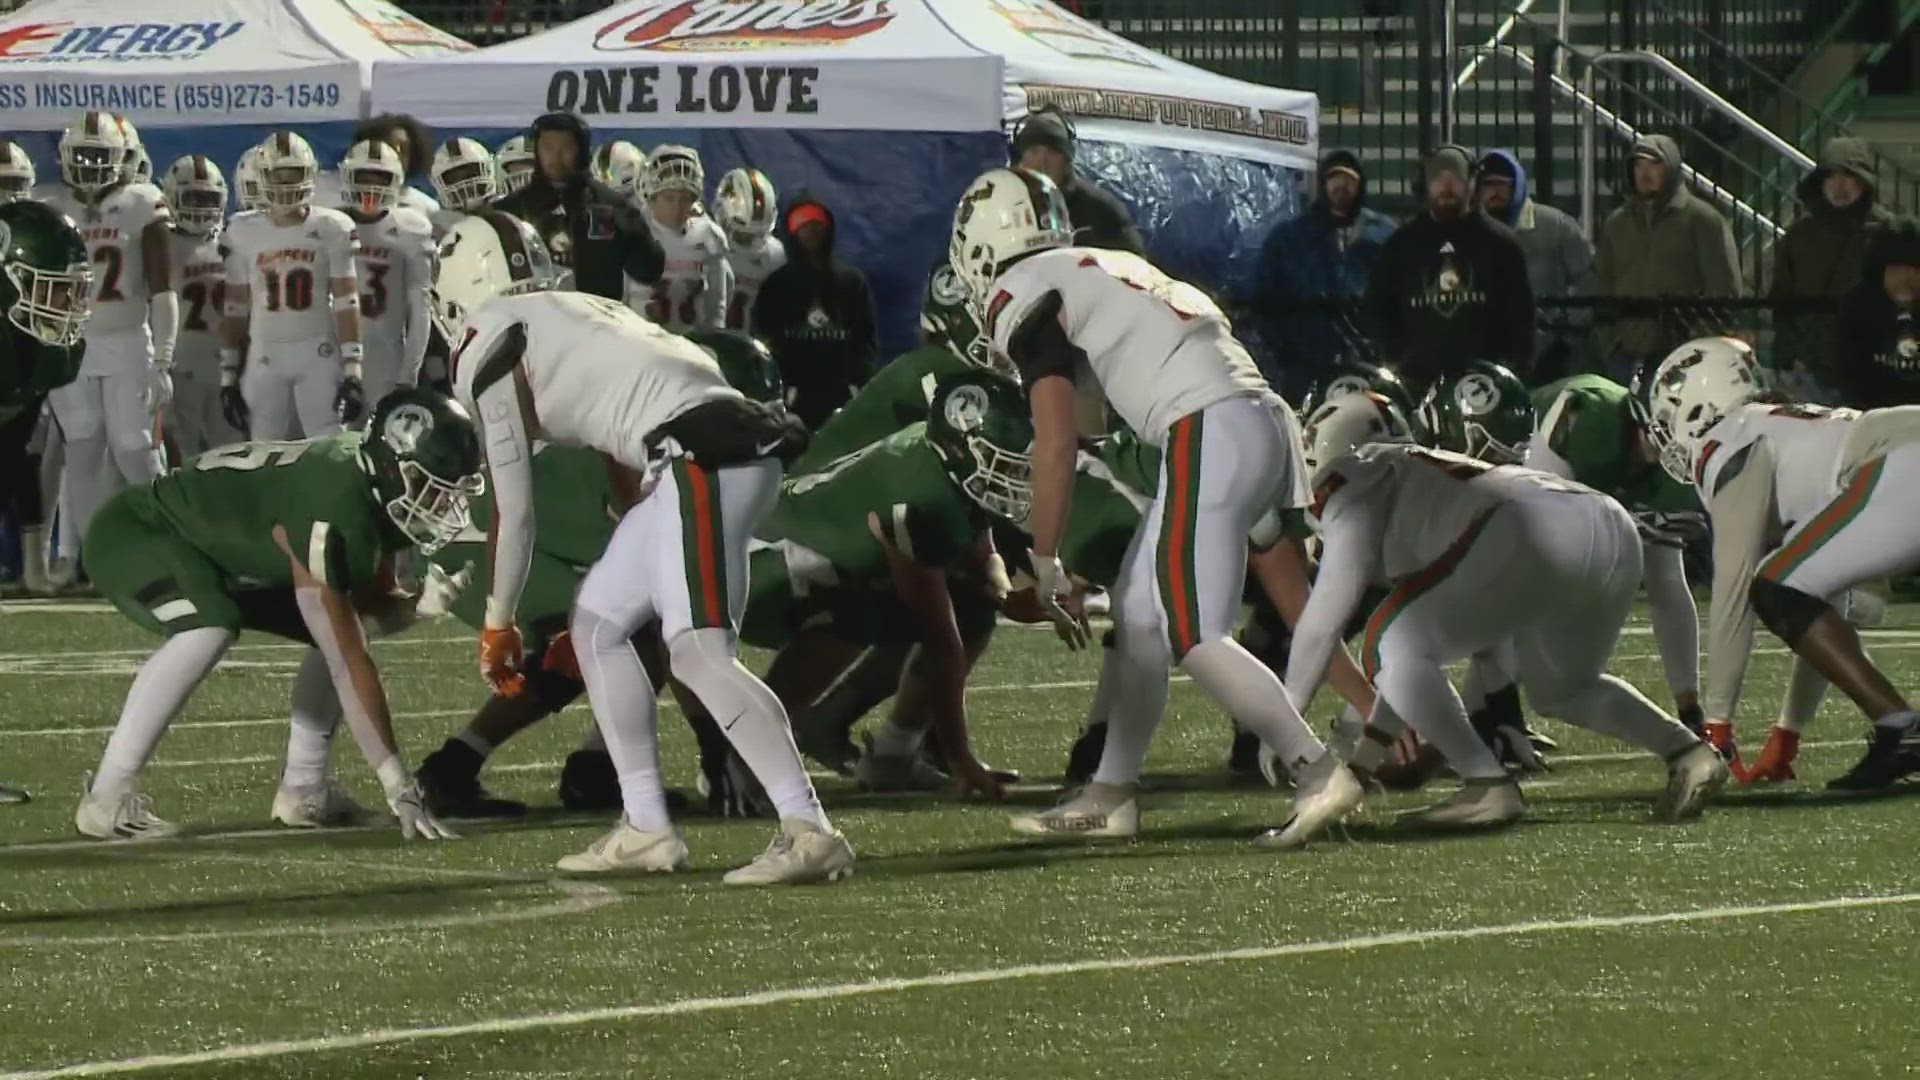 This week we’ll see highlights from Frederick Douglass versus Trinity.